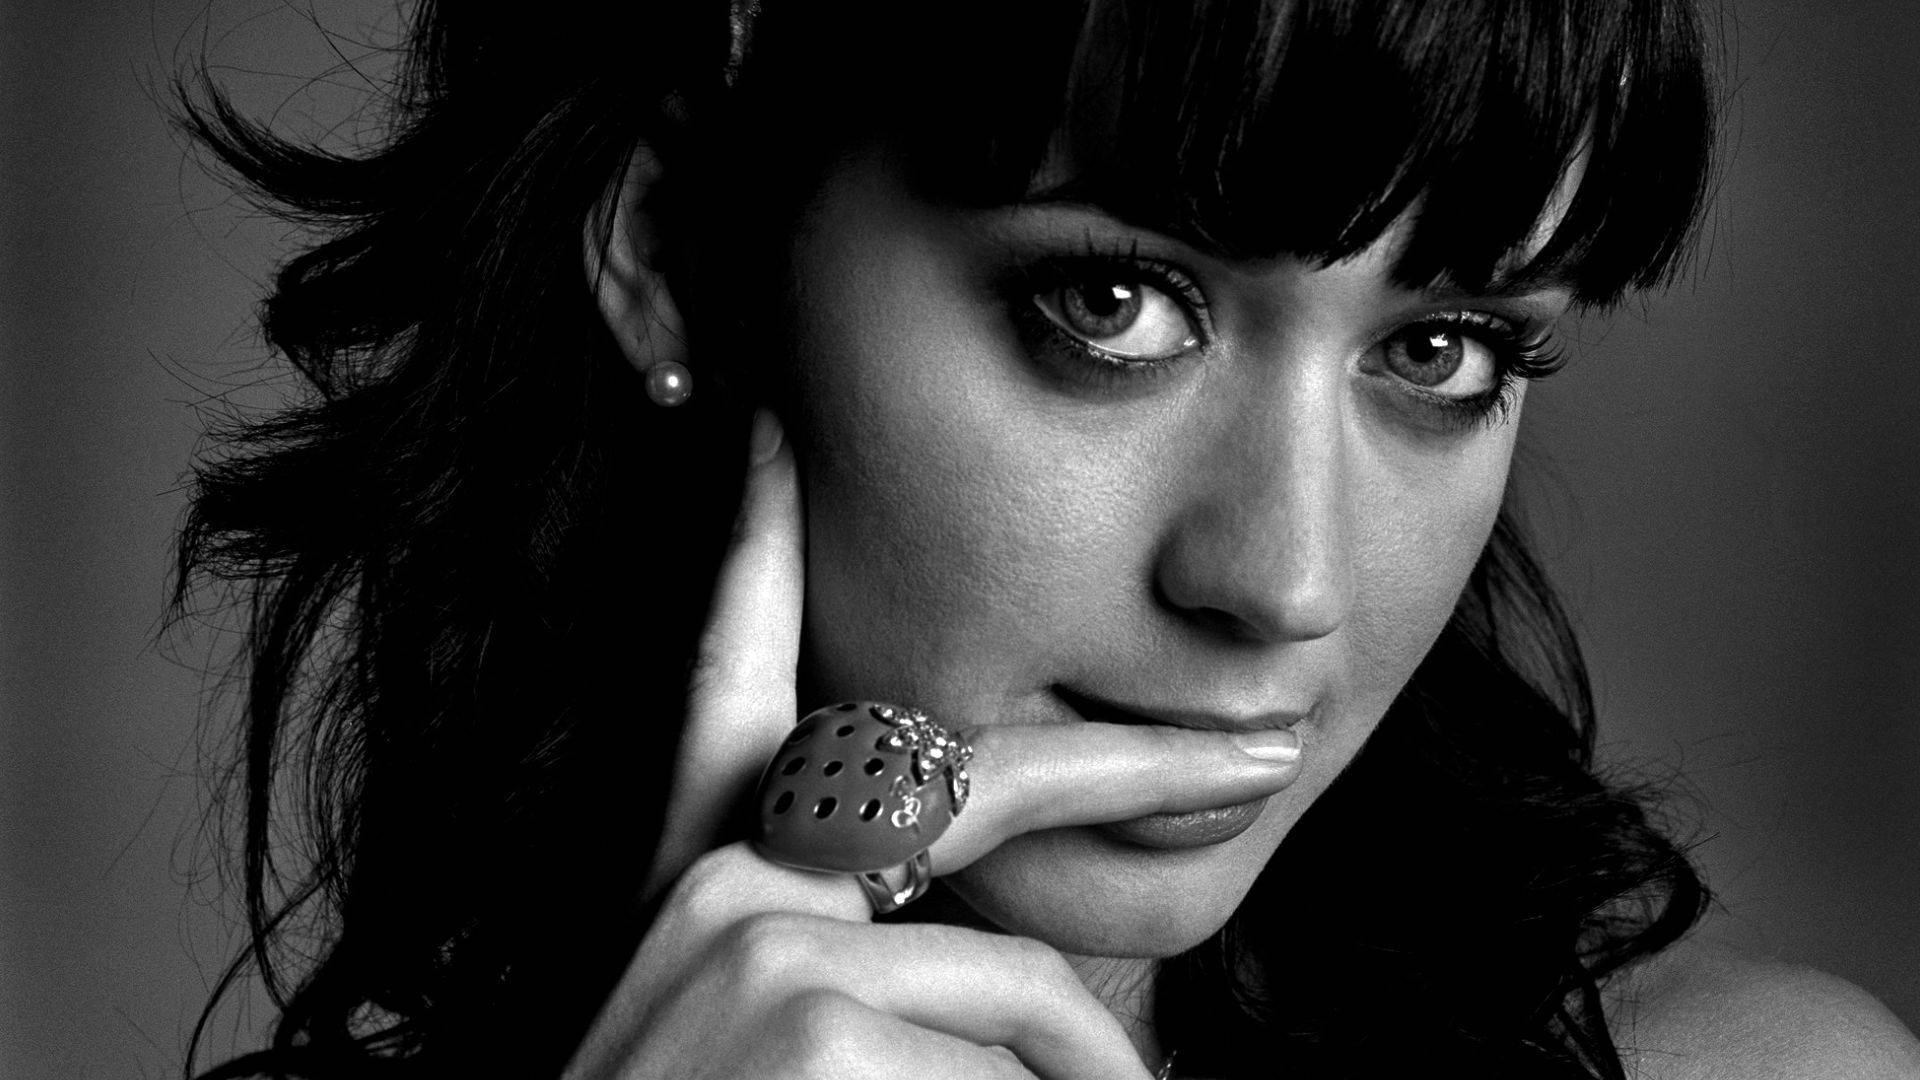 An Iconic Black And White Portrait Of Singer-songwriter Katy Perry Background